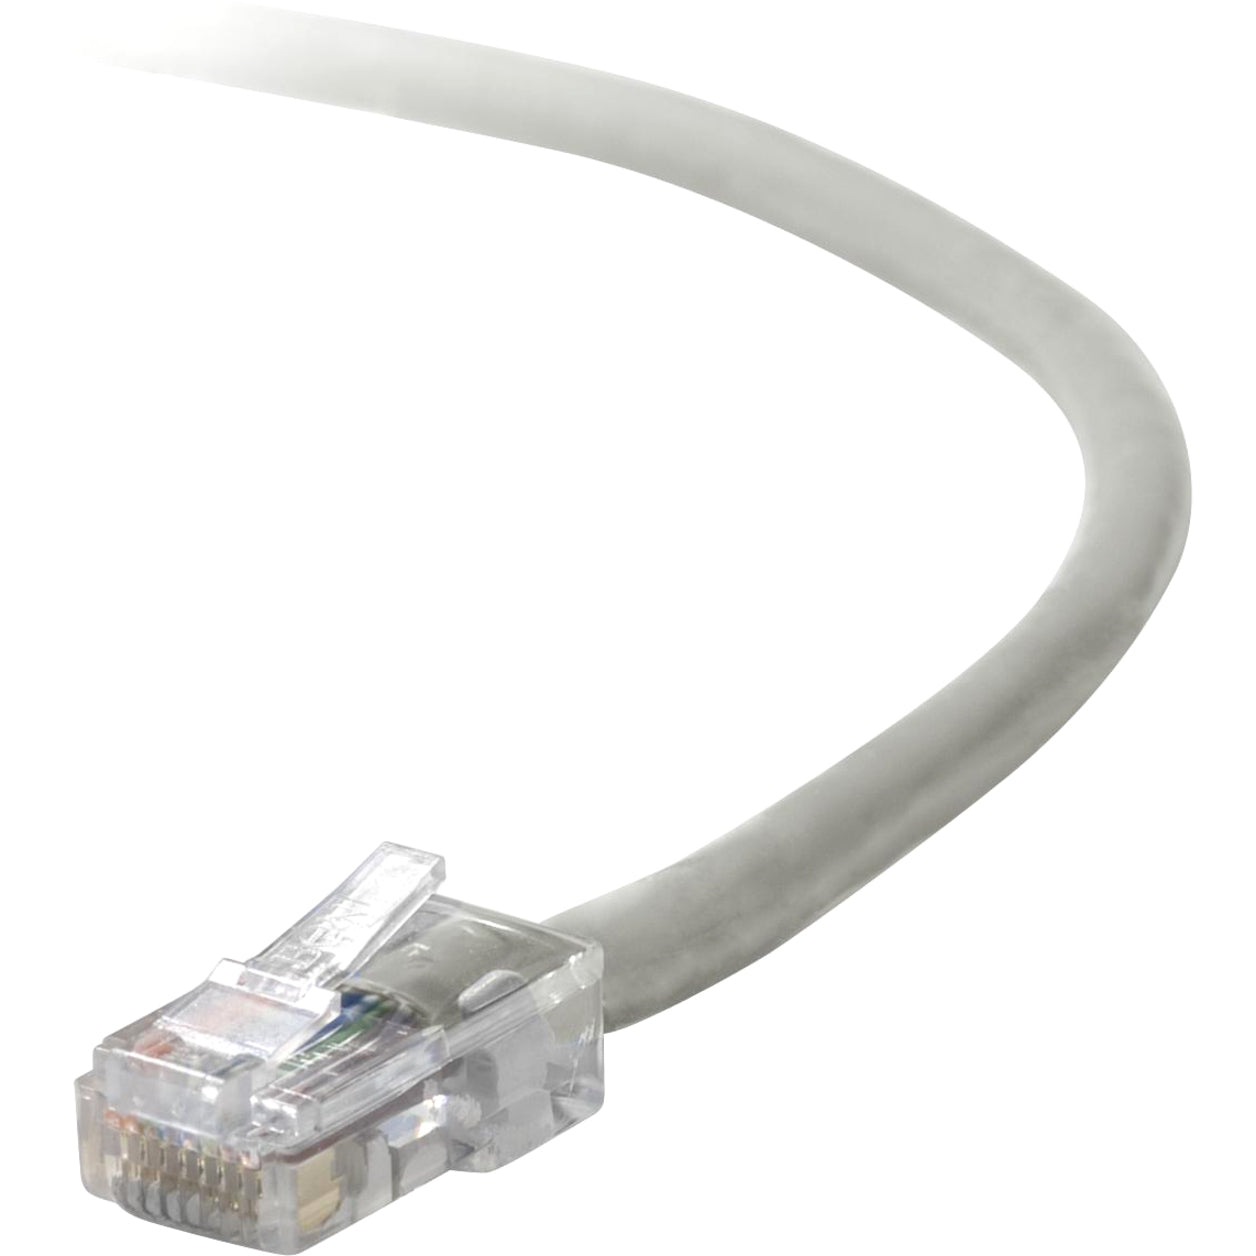 Belkin A3L791-40 Cat5e Patch Cable, 40 ft, RJ45 Male to RJ45 Male